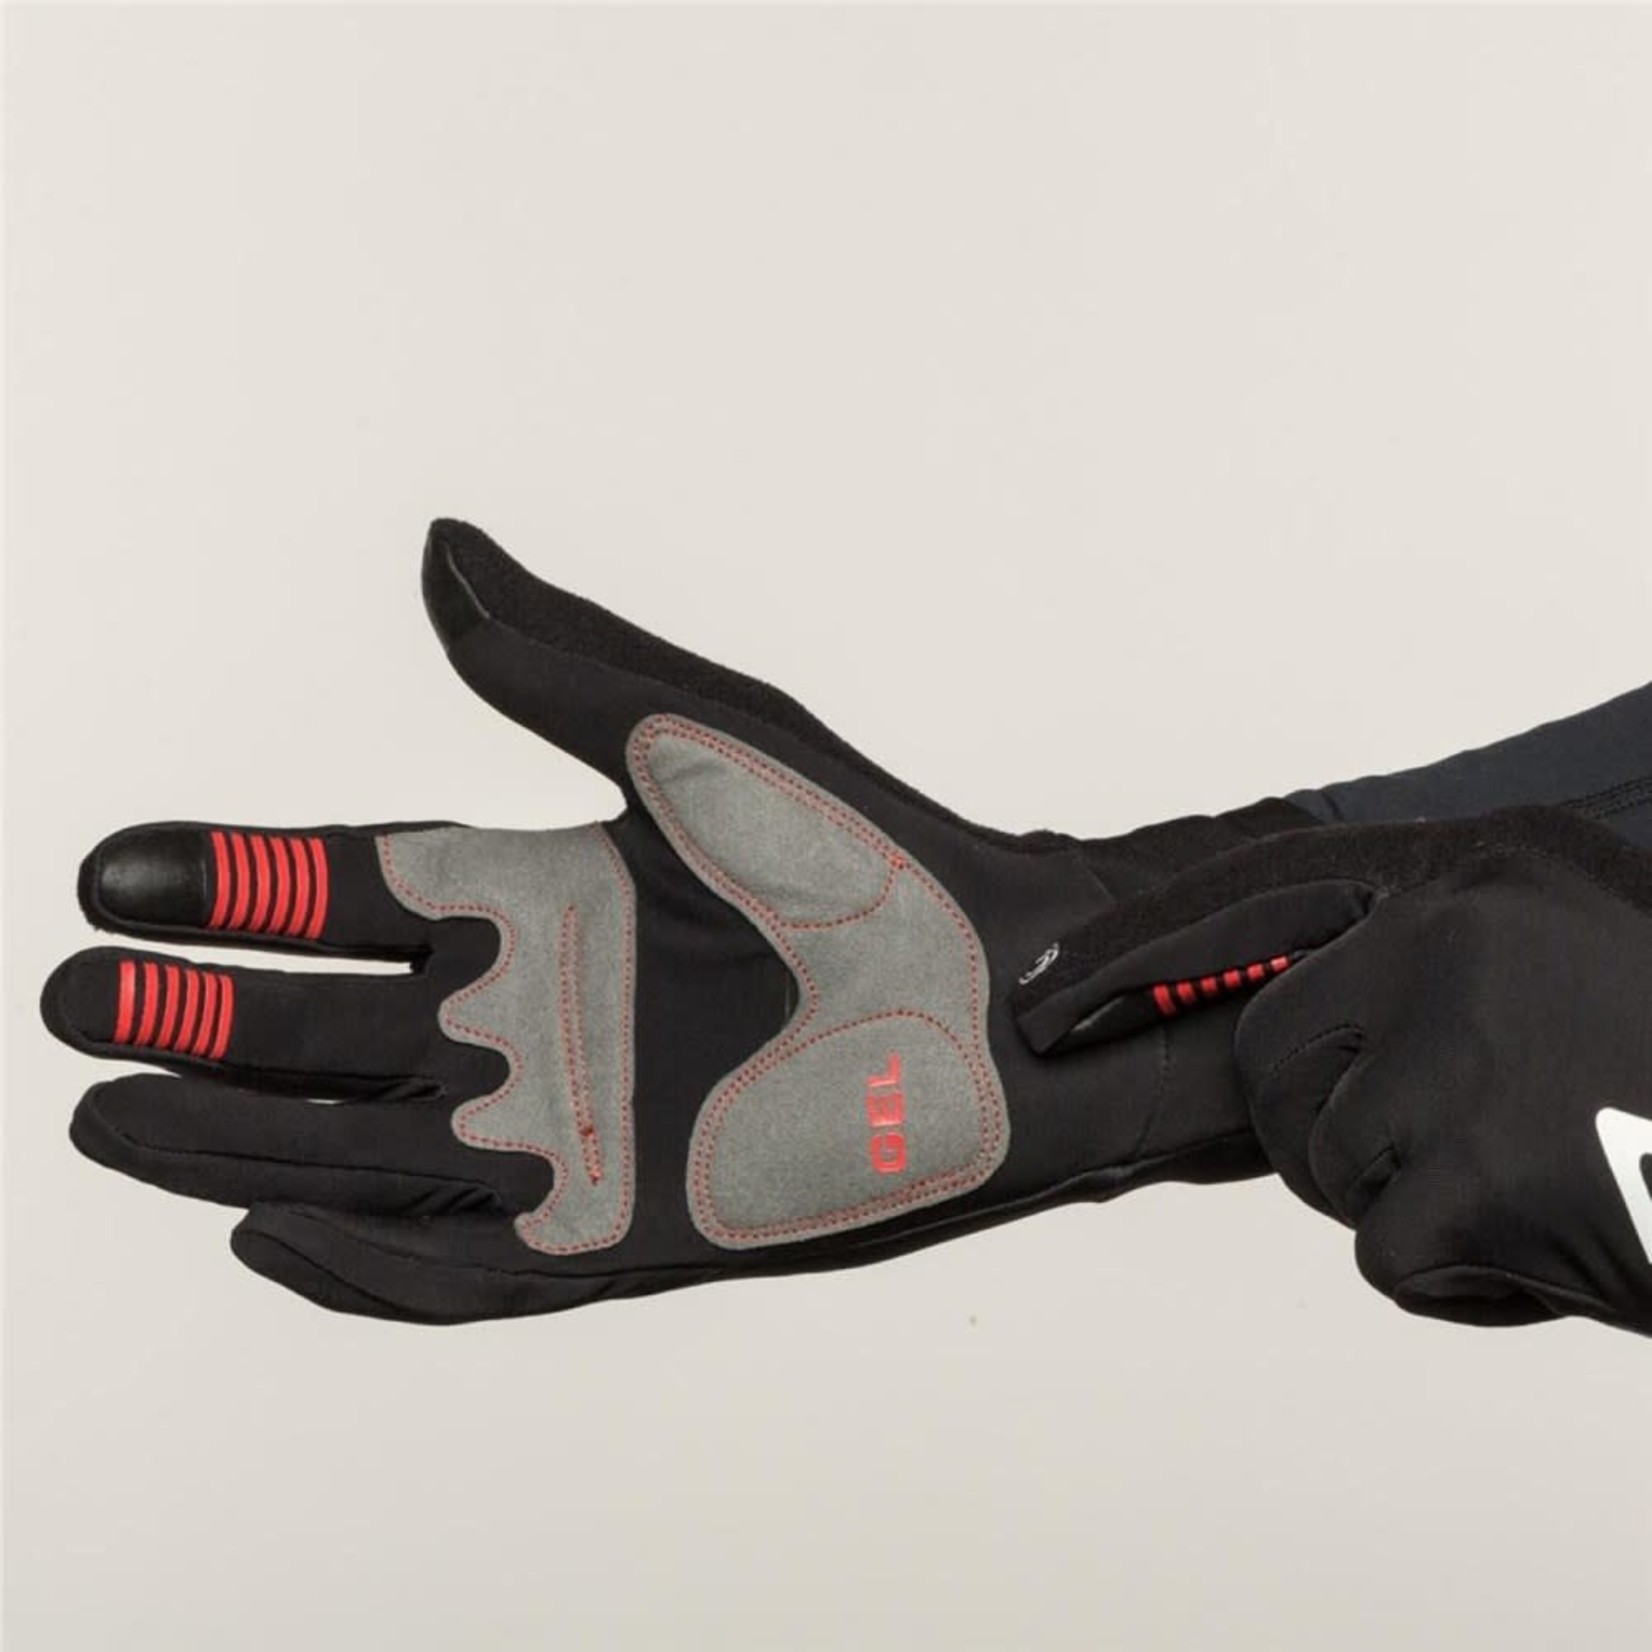 Bellwether Bellwether Bike/Cycling Glove - Climate Control Microfibre Glove - Black